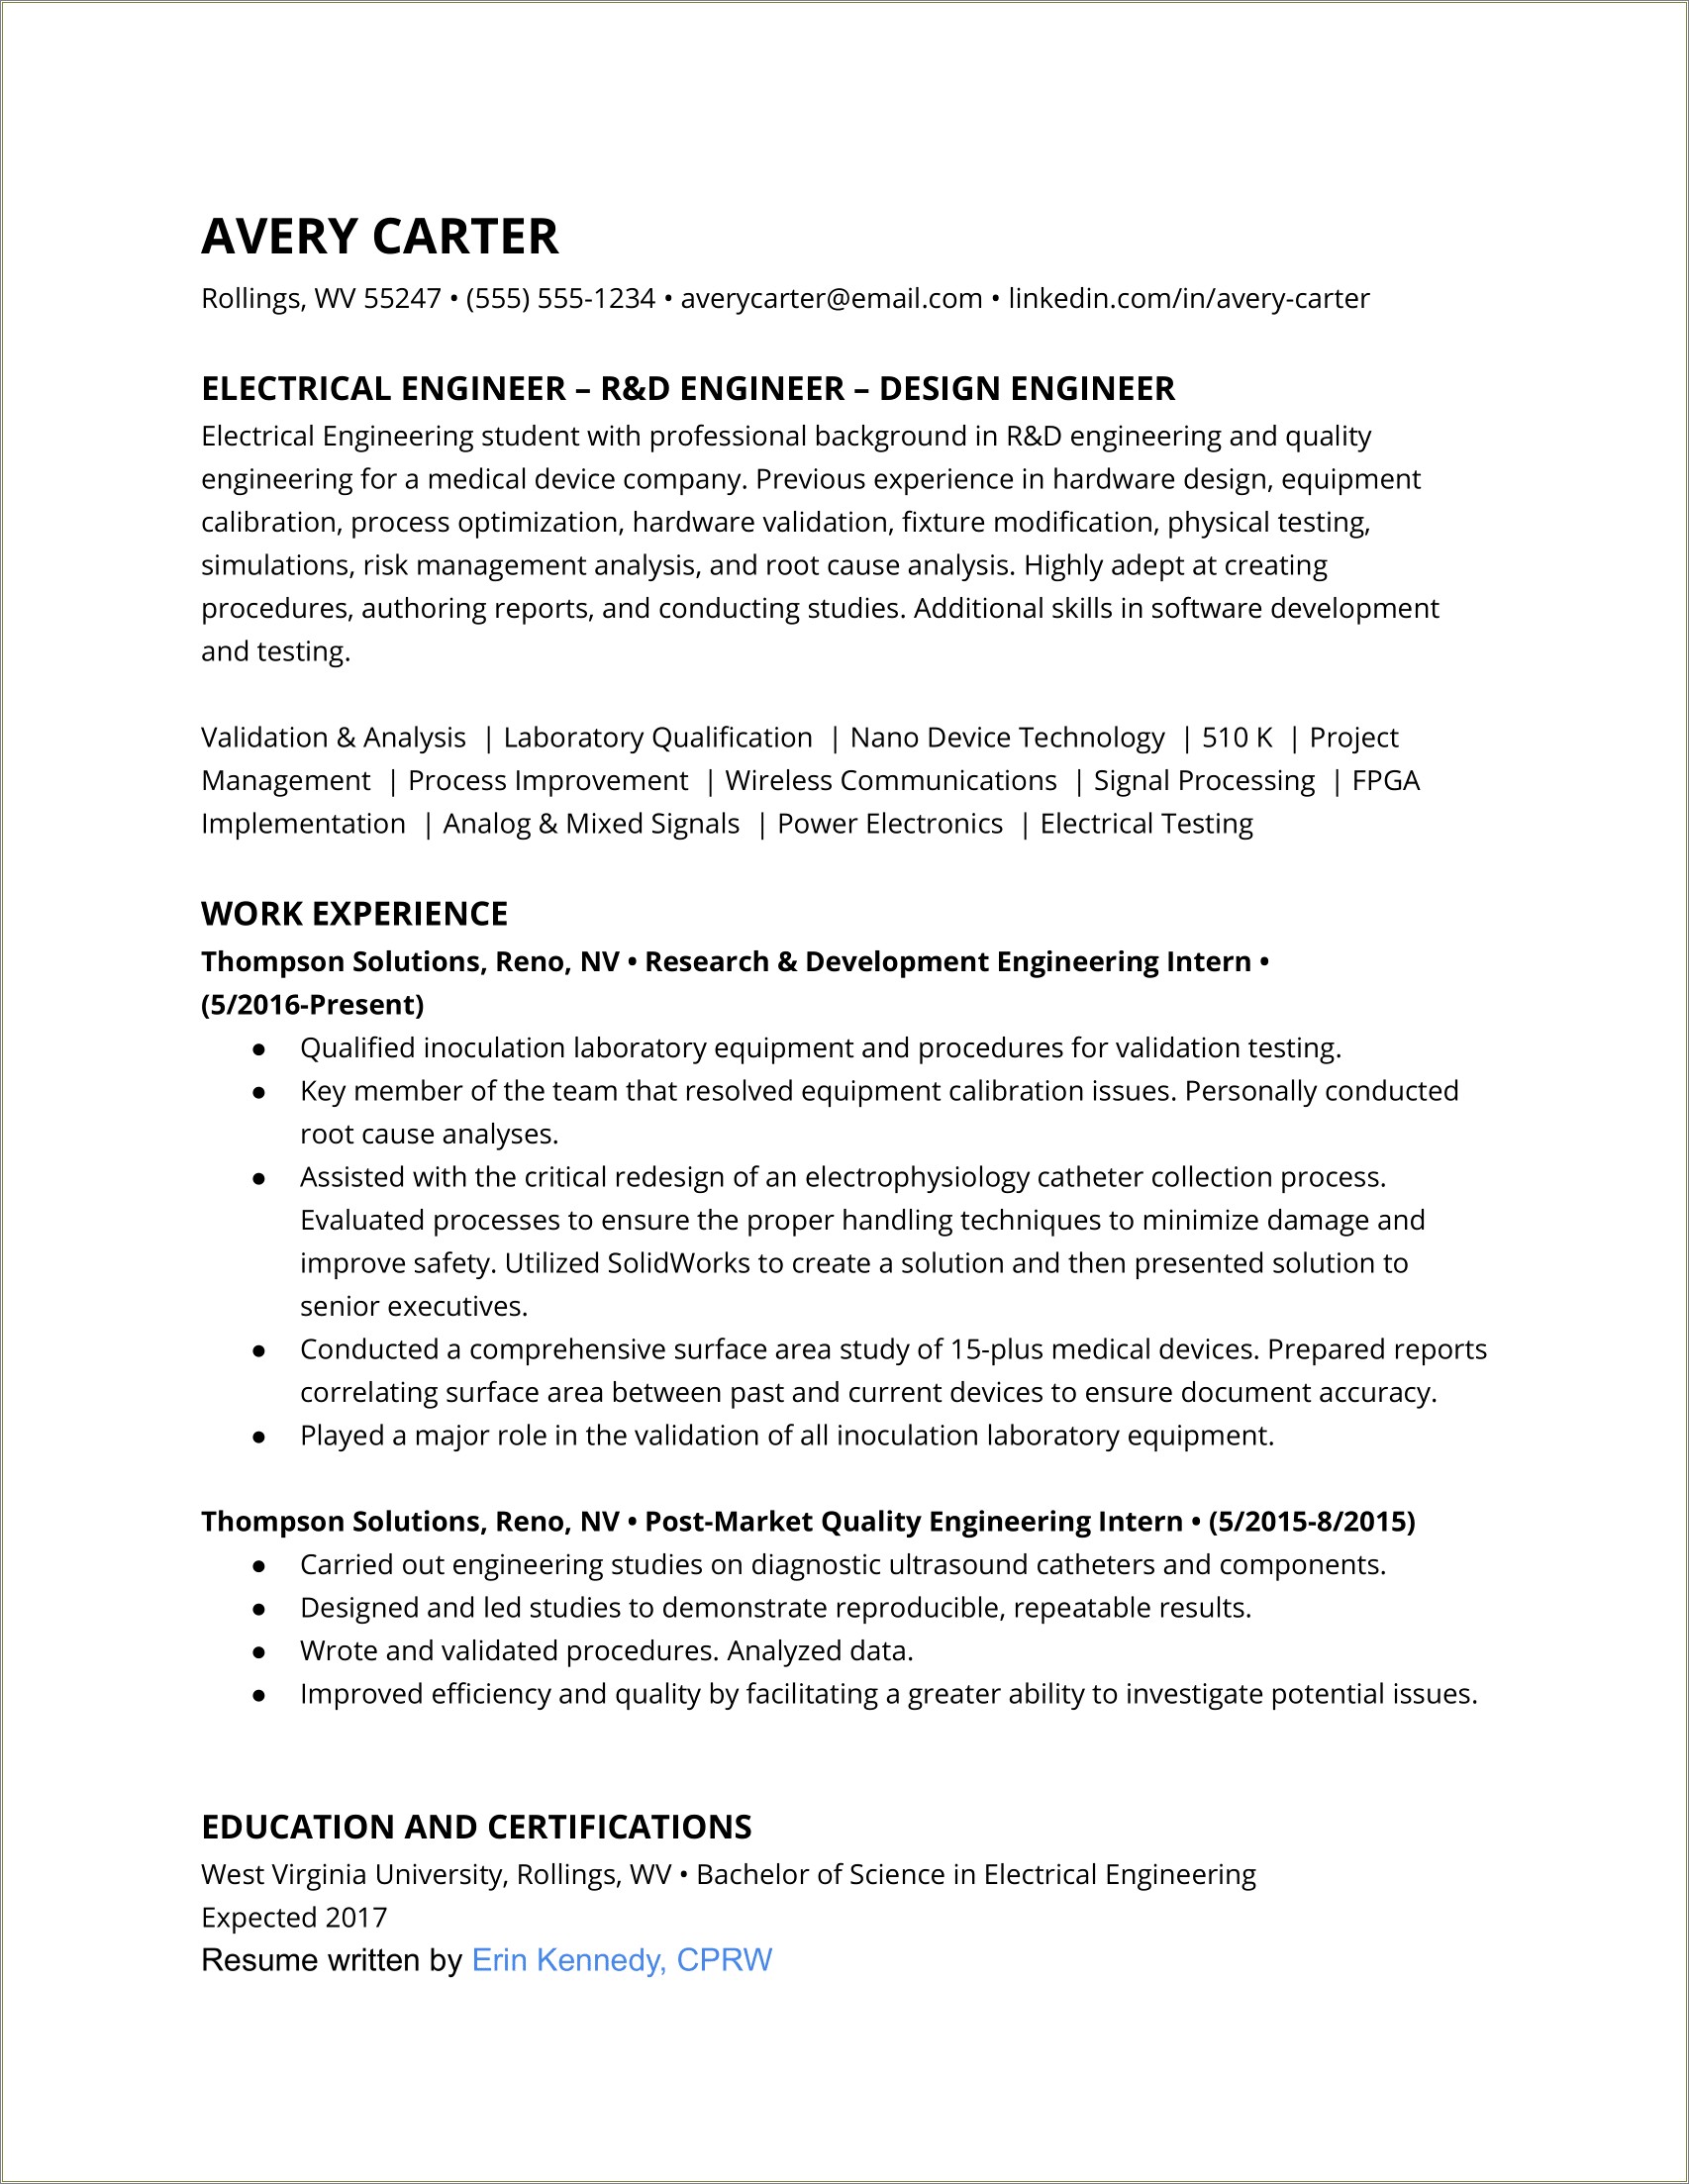 Resume For Electrical Engineer With 10 Years Experience